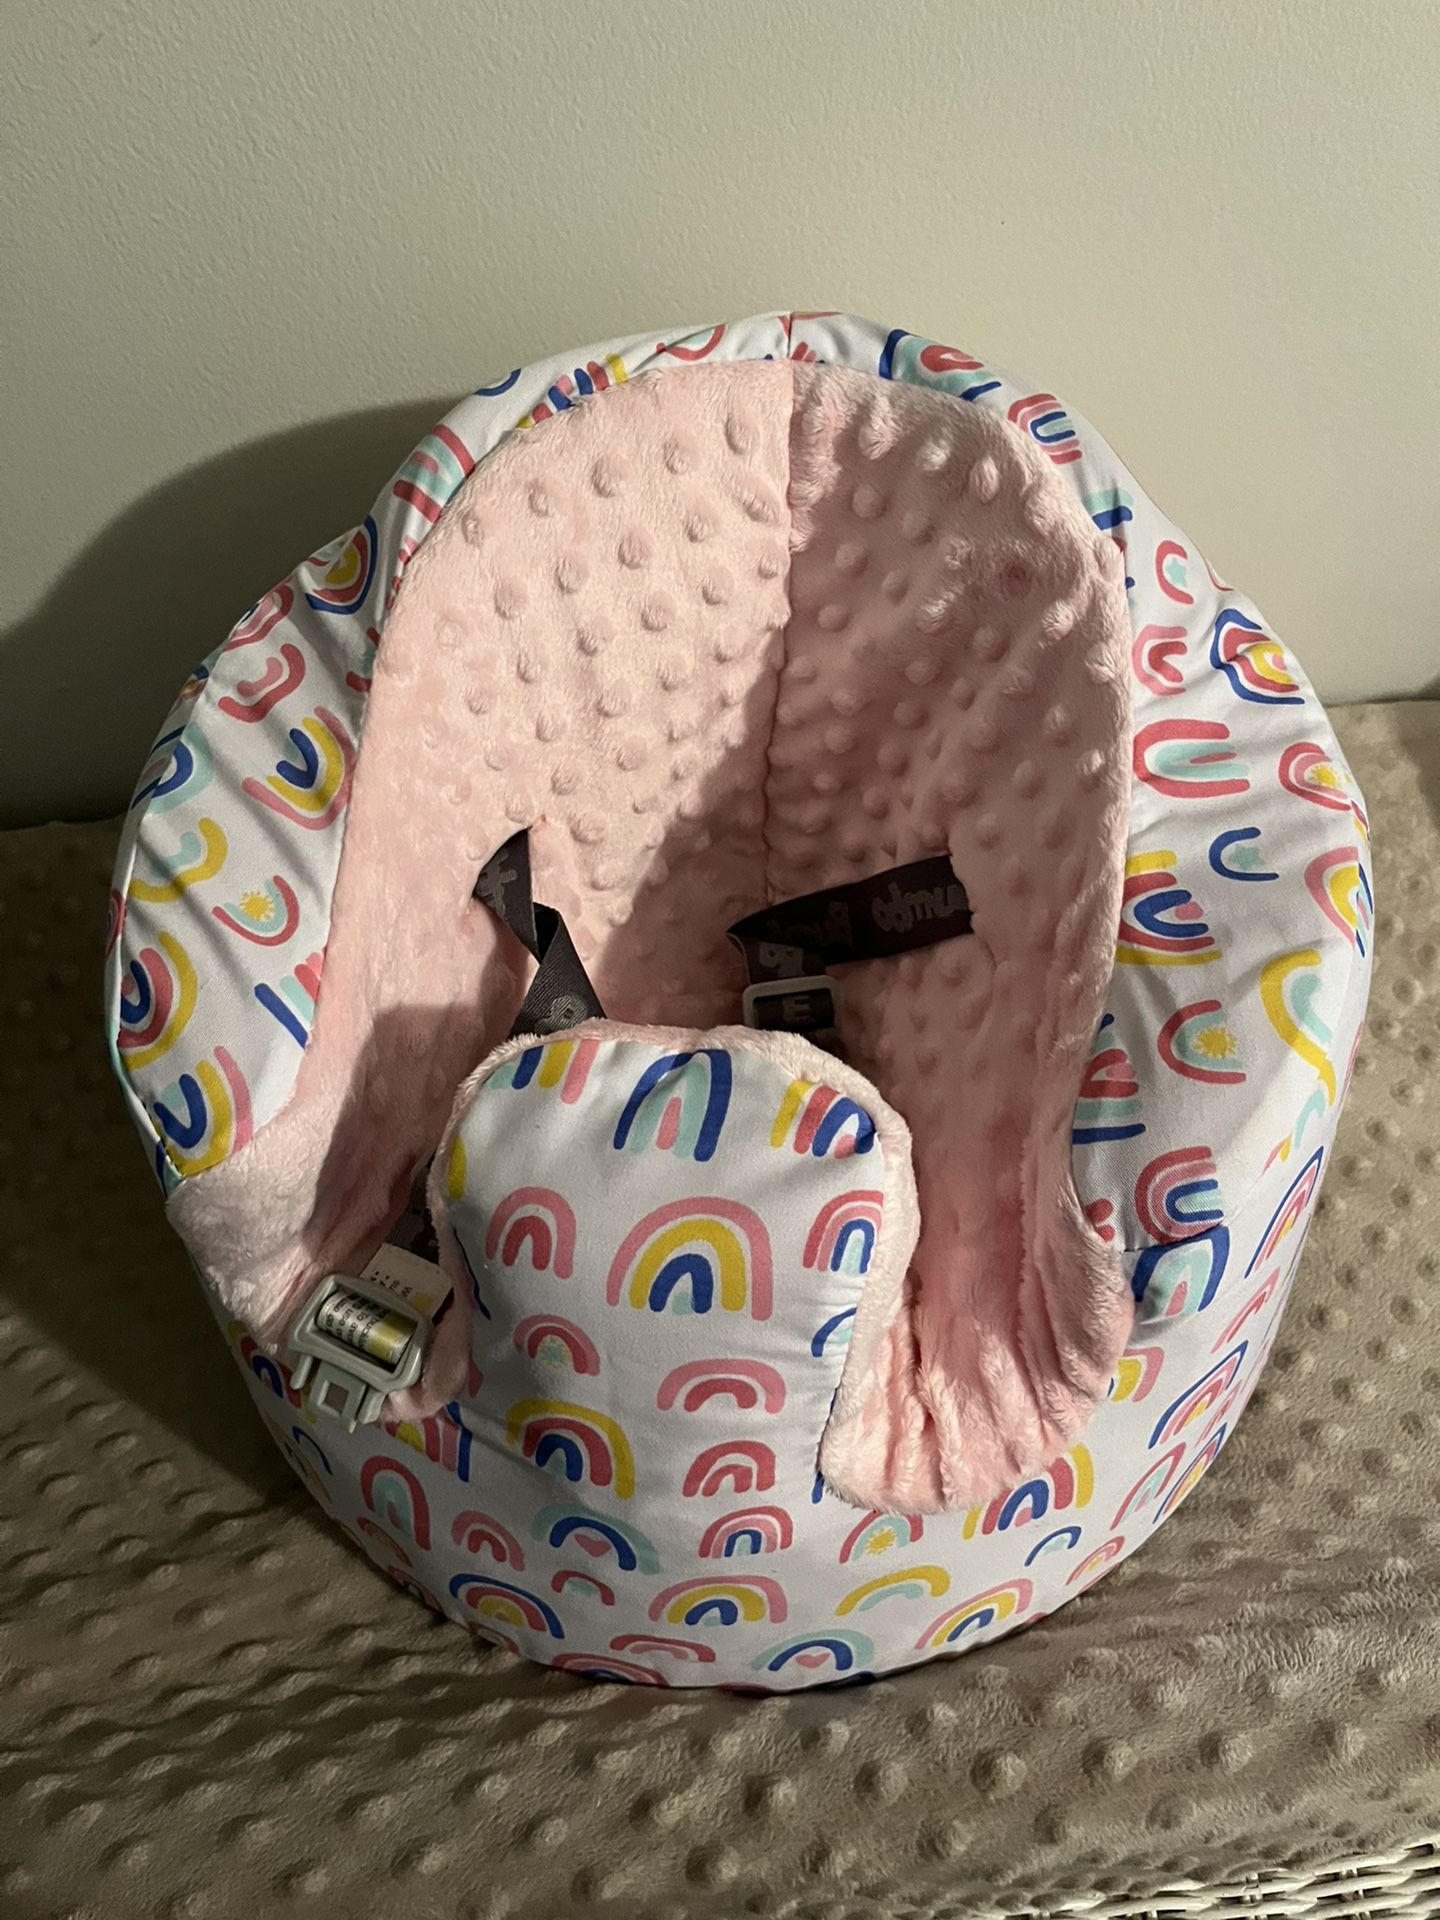 Bumbo Chair With Cover 